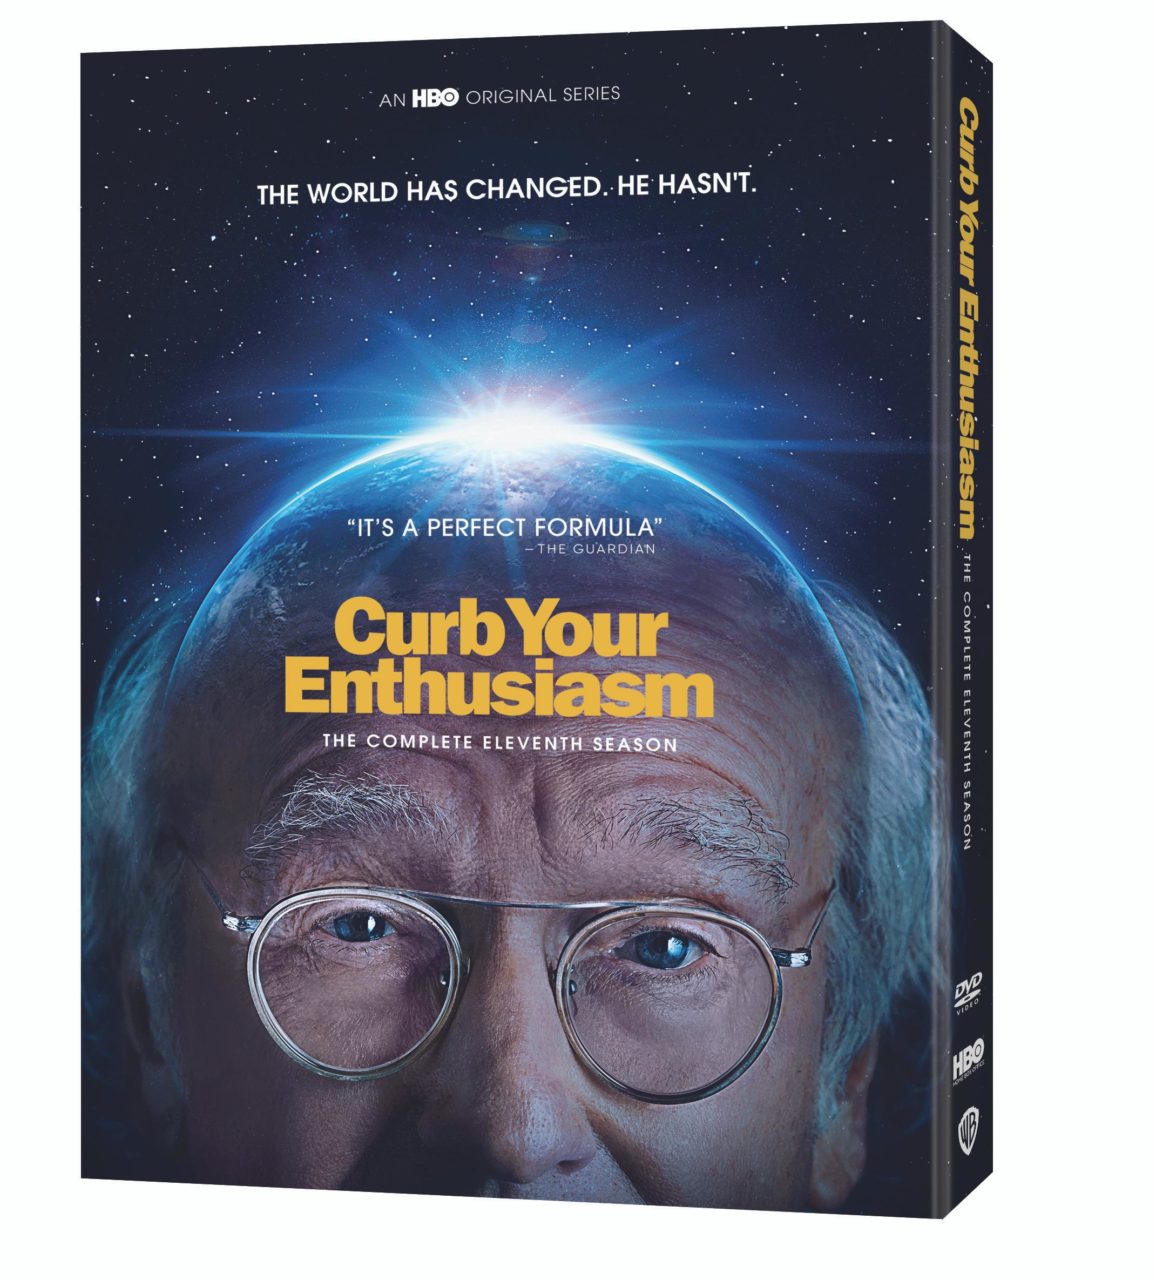 Curb Your Enthusiasm: The Complete Eleventh Season DVD cover (Warner Bros. Home Entertainment)